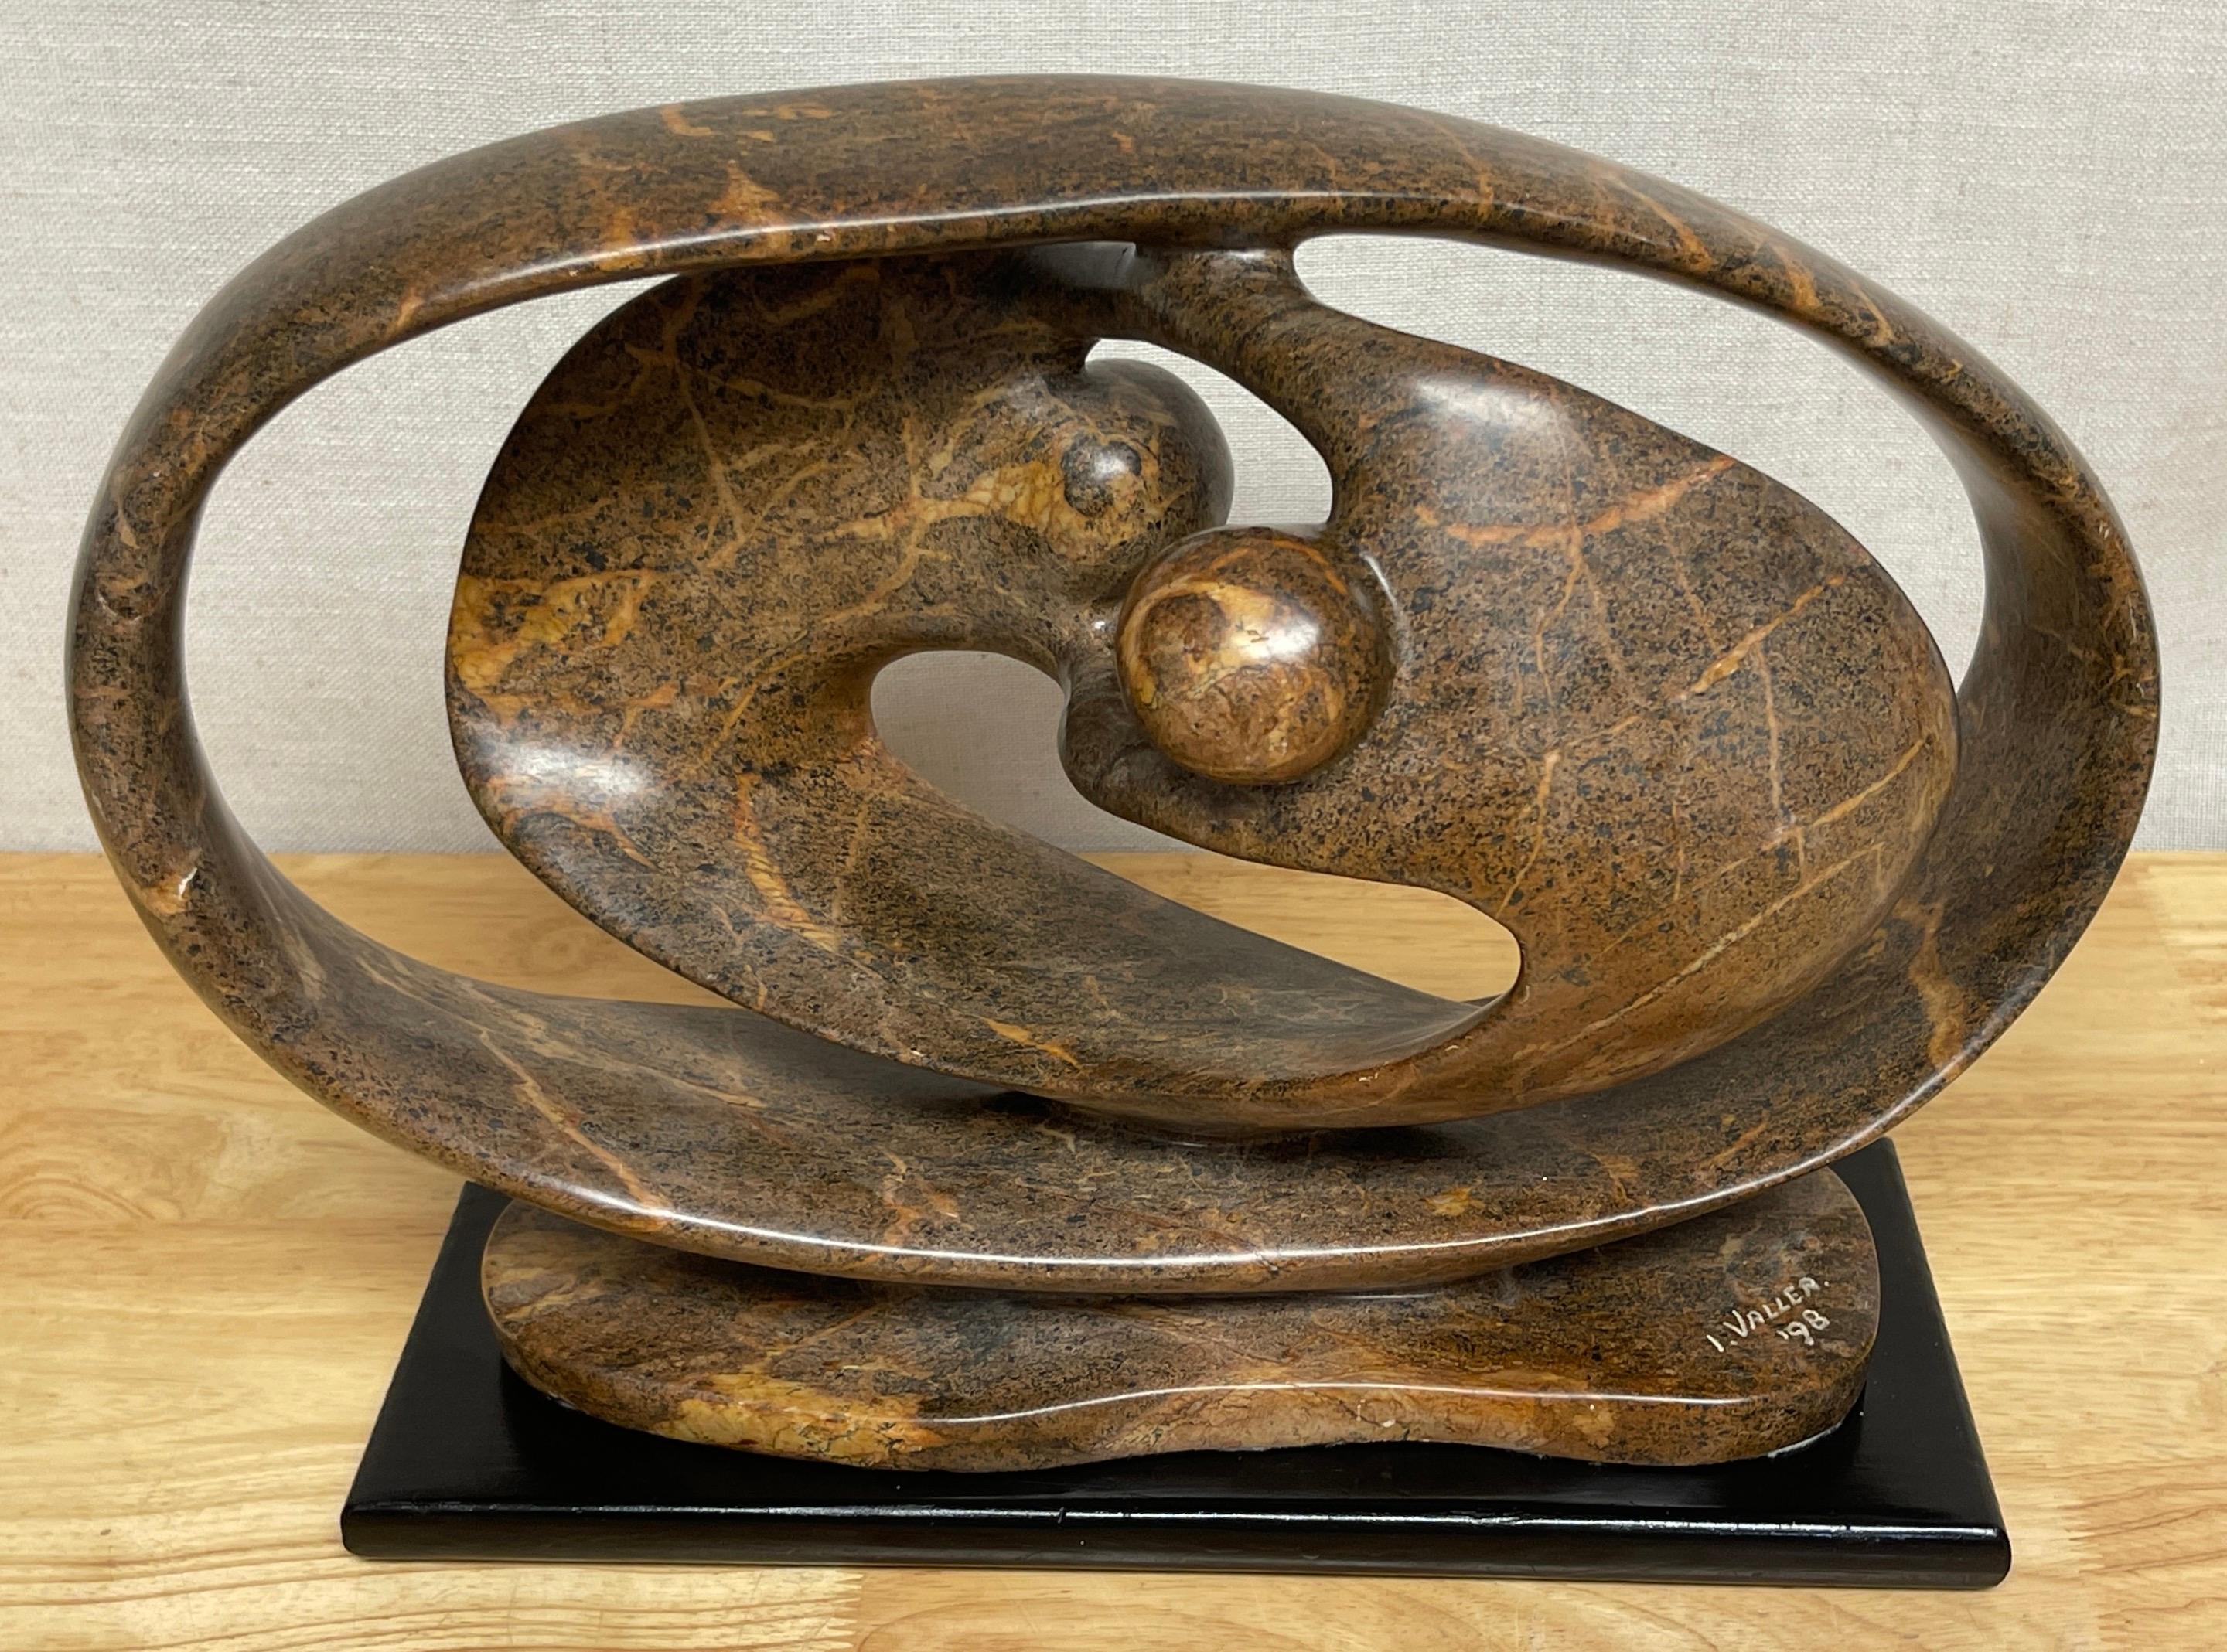 Modern Carved Marble Abstract-Biomorphic Sculpture Signed, I. Vallea '98
USA, signed & dated I. Vallea '98
A good size well executed work, in earth tone marble, of horizontal oval form a pierced Ying-Yang style abstract /biomorphic form, with